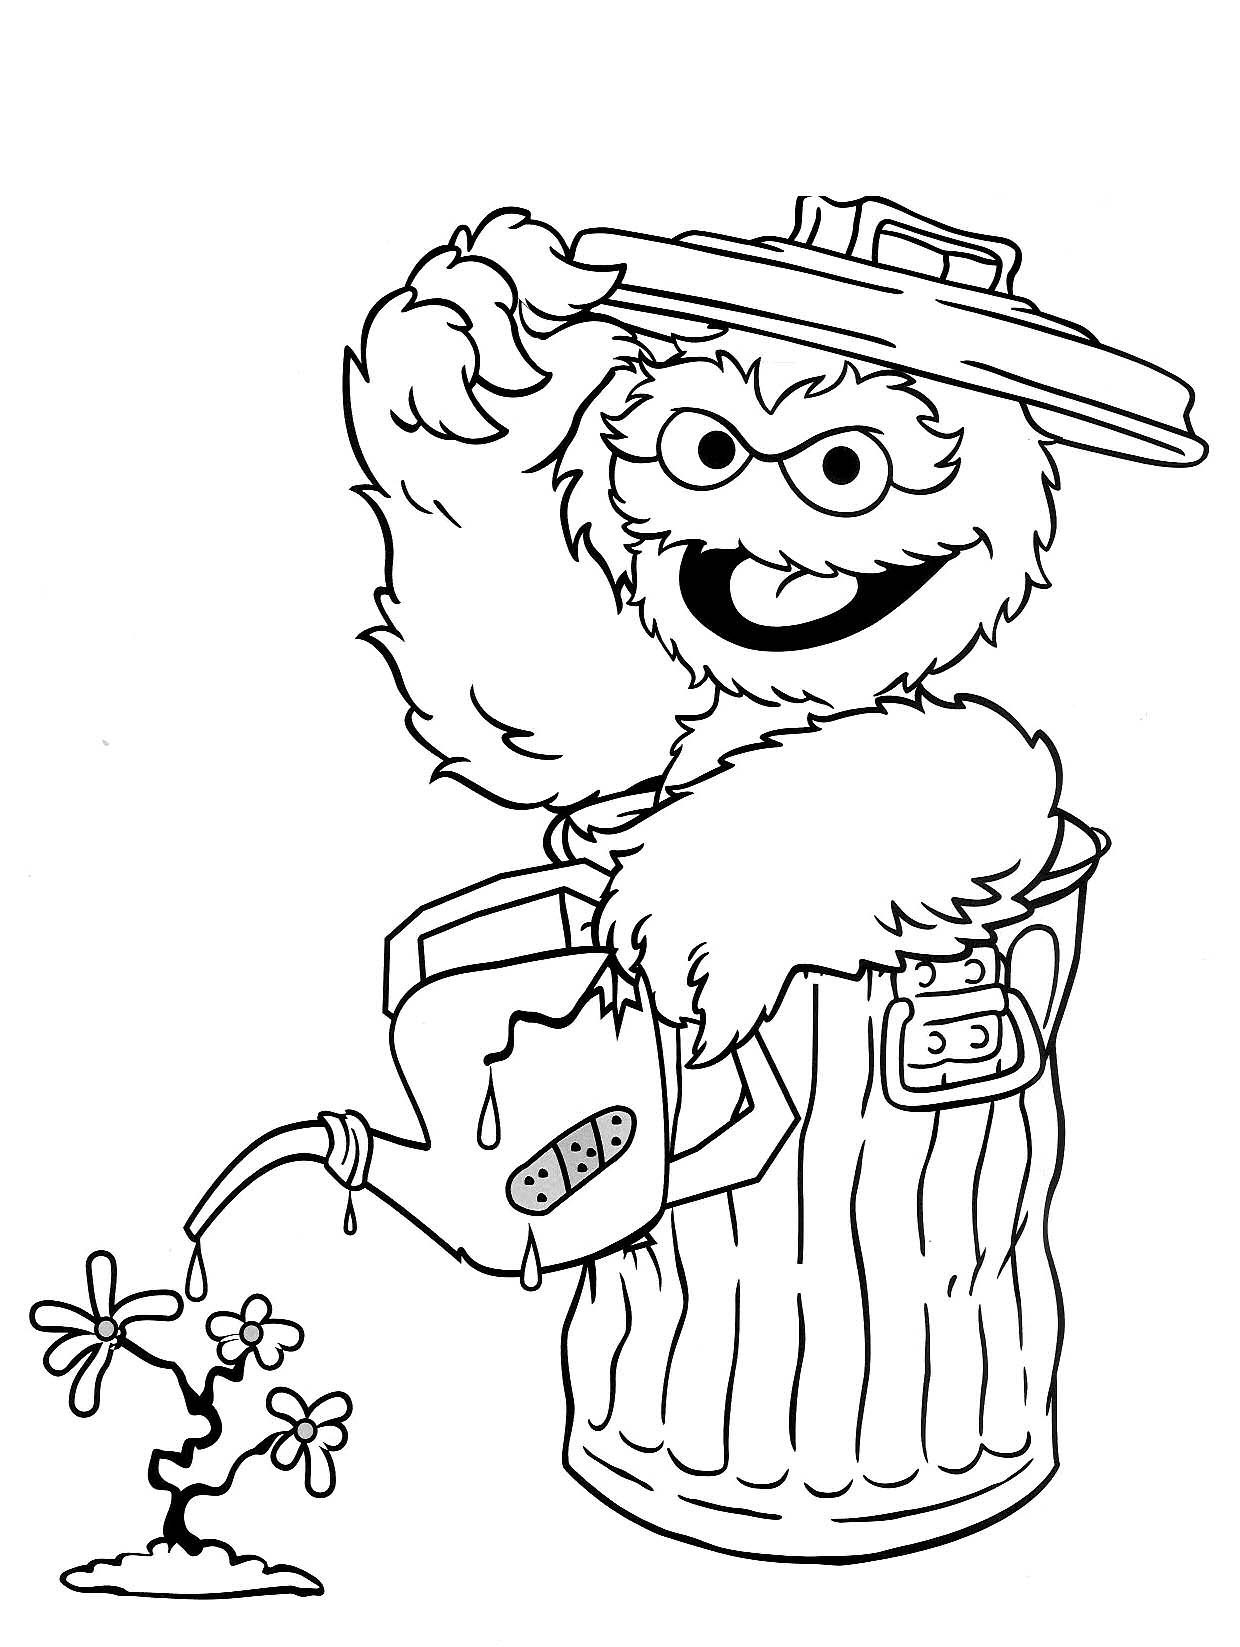 72 Oscar the Grouch Coloring Pages Printable 12